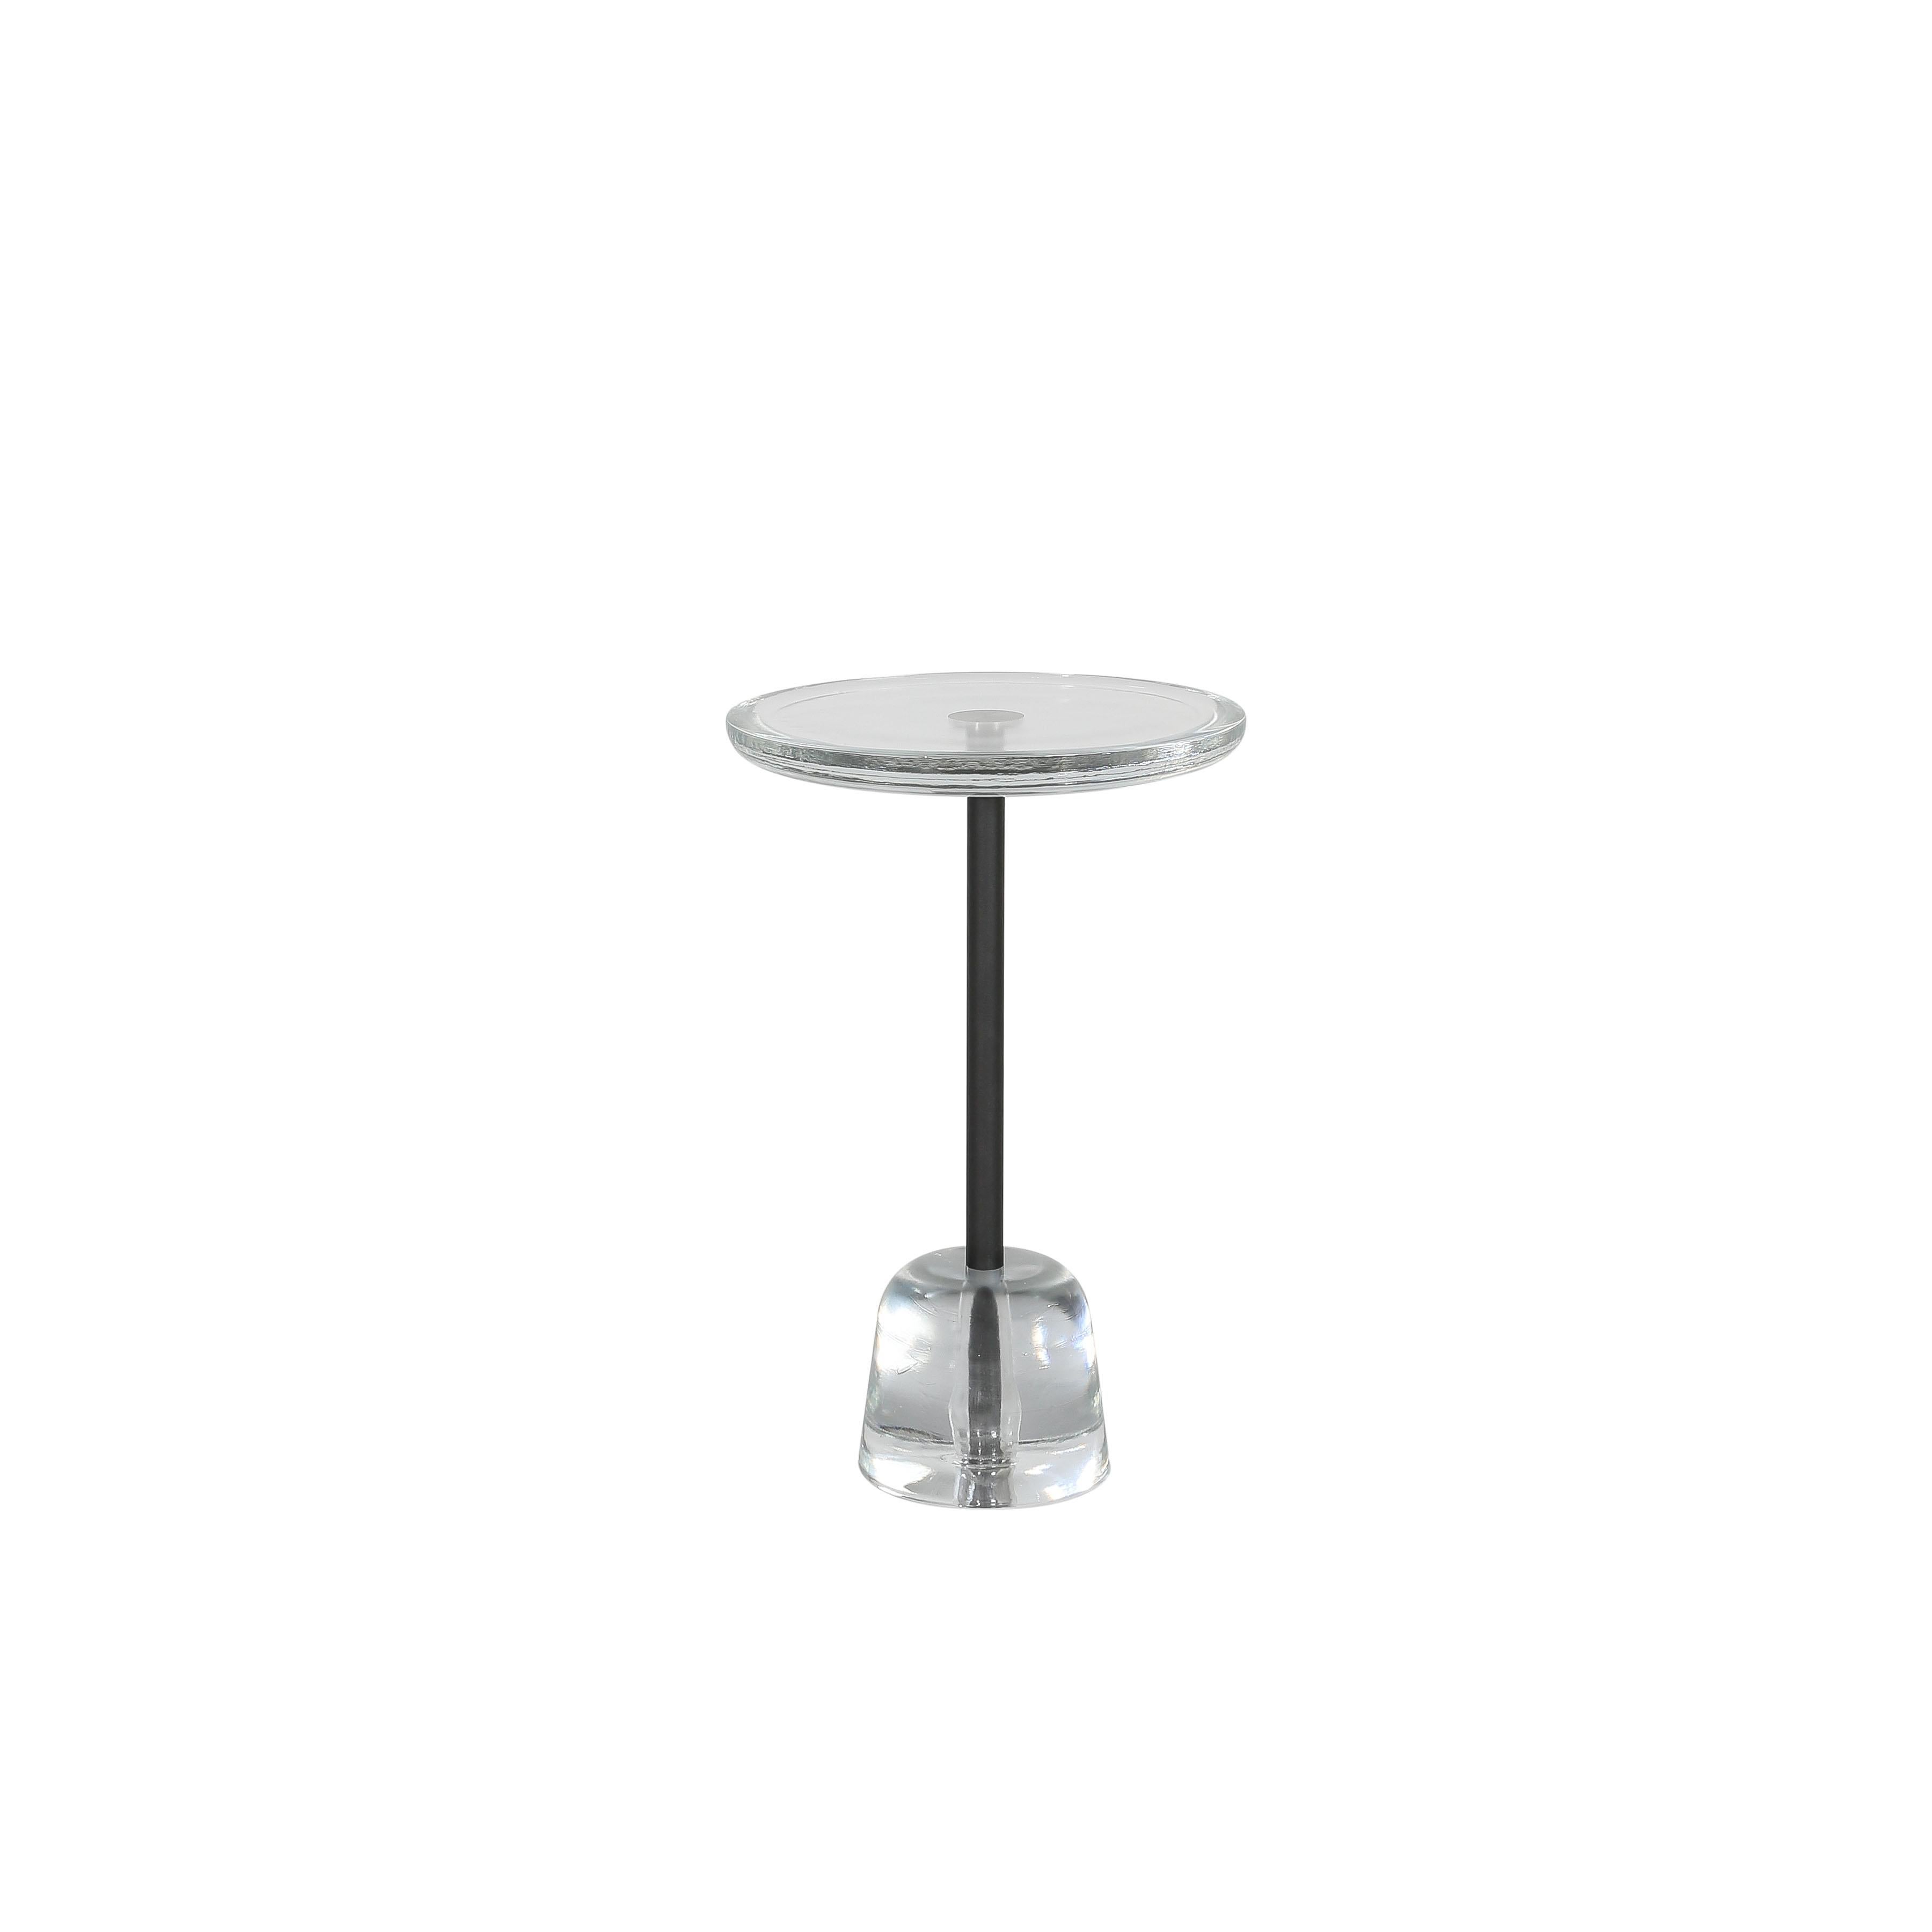 Pina high transparent black side table by Pulpo
Dimensions: D34 x H52 cm
Materials: glass; brass and steel

Also available in different colors. 

Sebastian Herkner’s distinctively tall, skinny side table series pina is inspired by the abstract